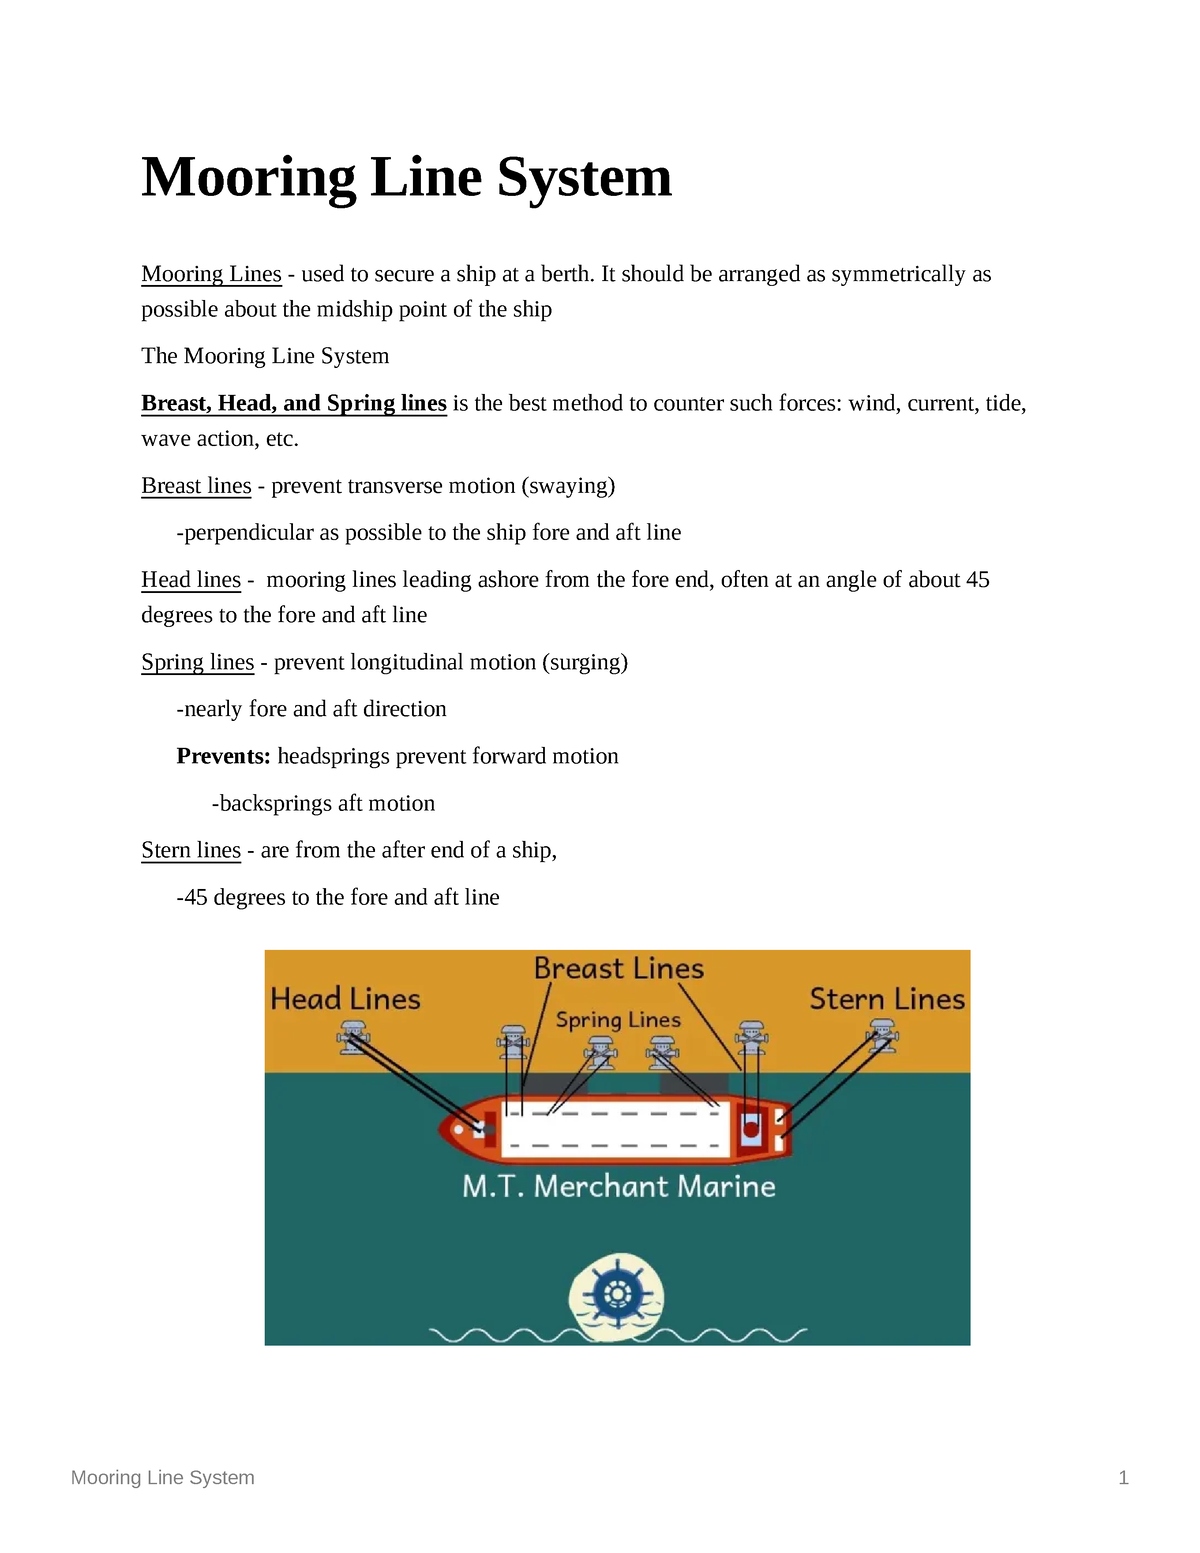 Mooring Line System - a short decription about the said topic